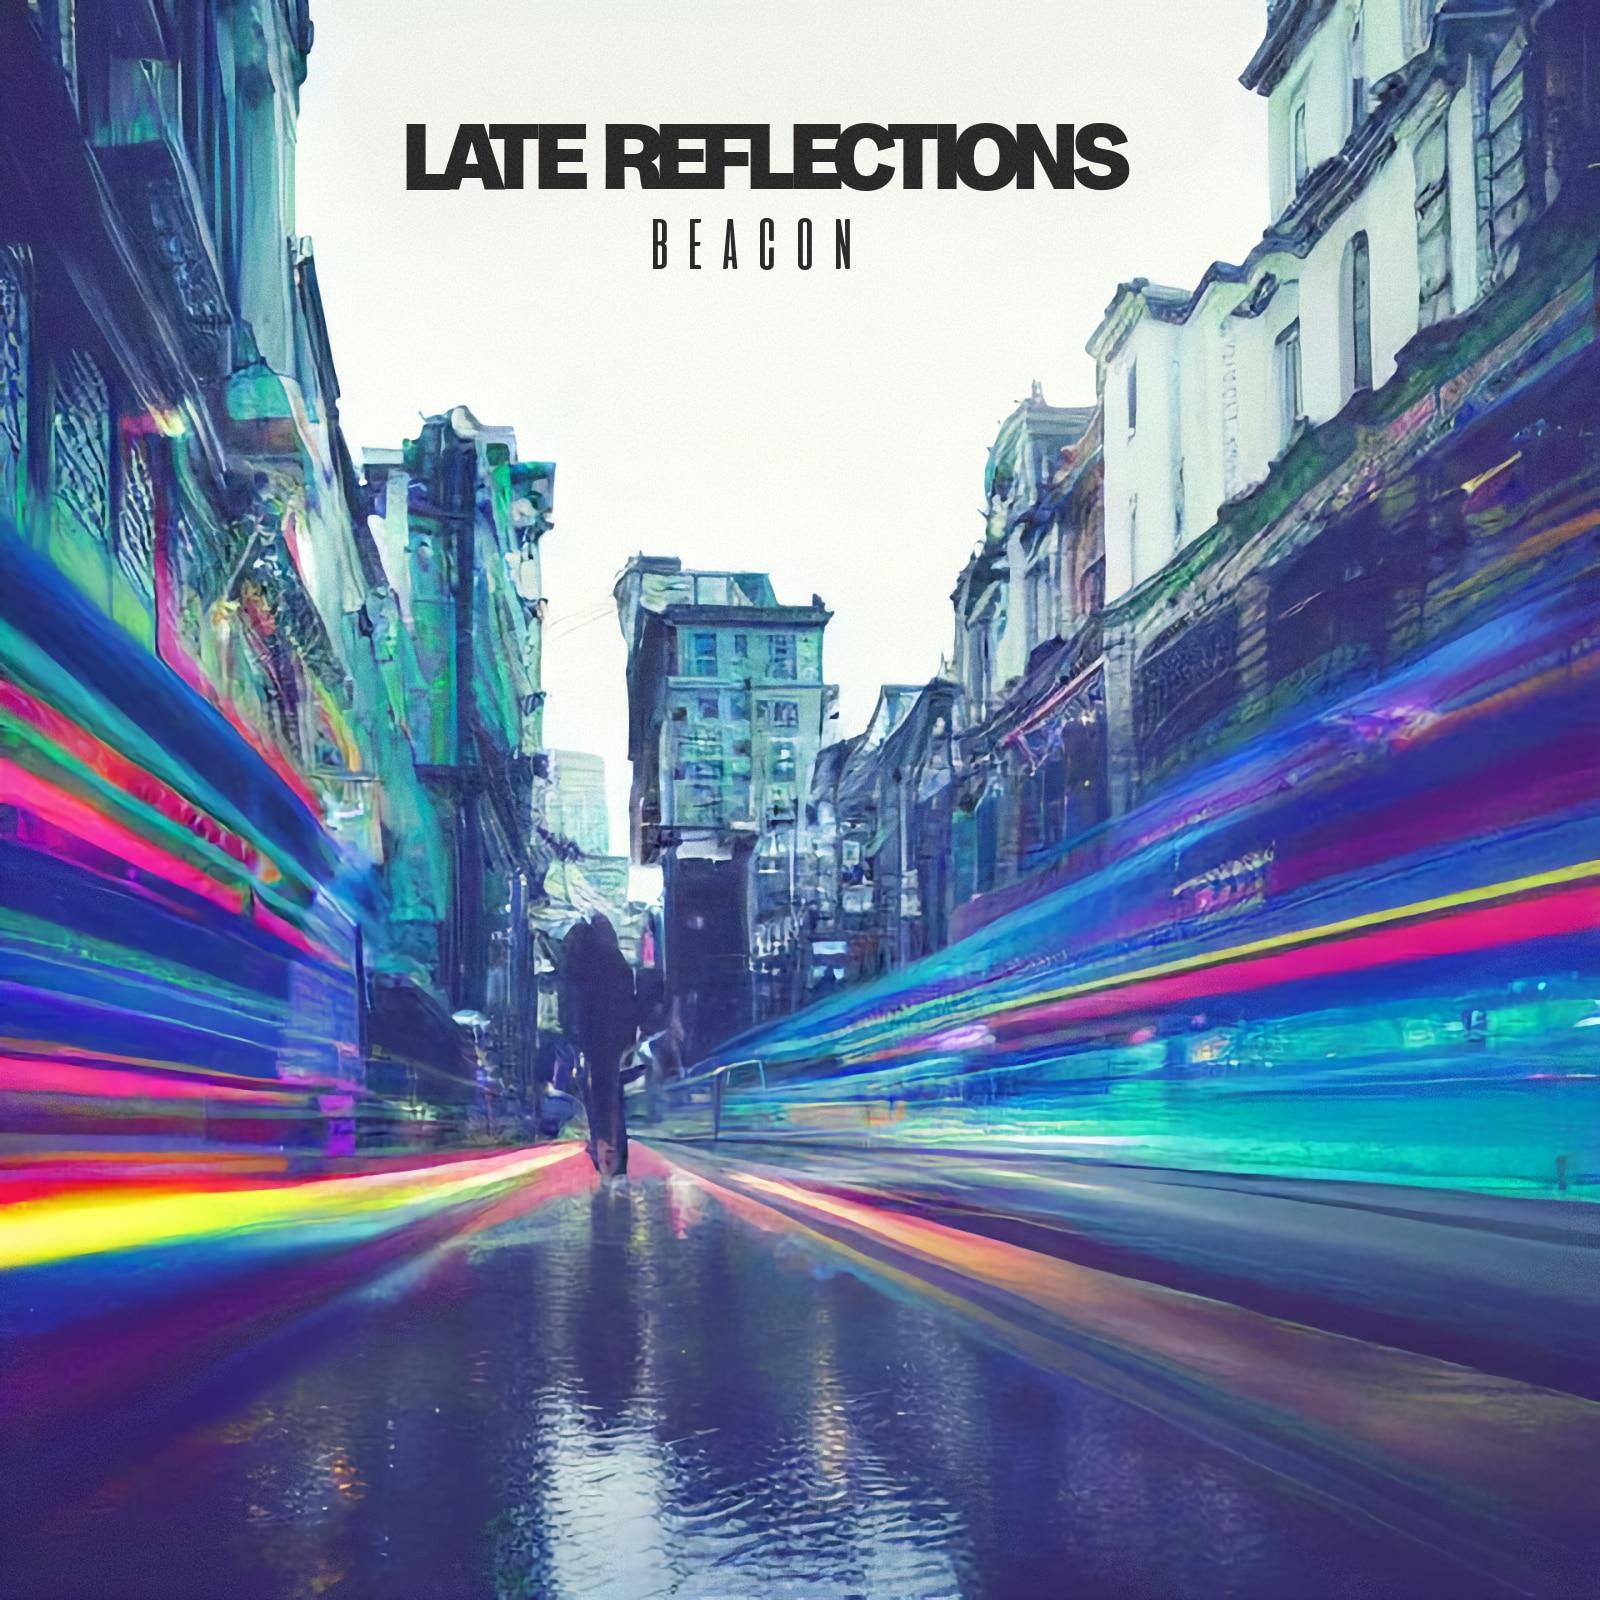 Late Reflections - Beacon (remastered) [FLAC]